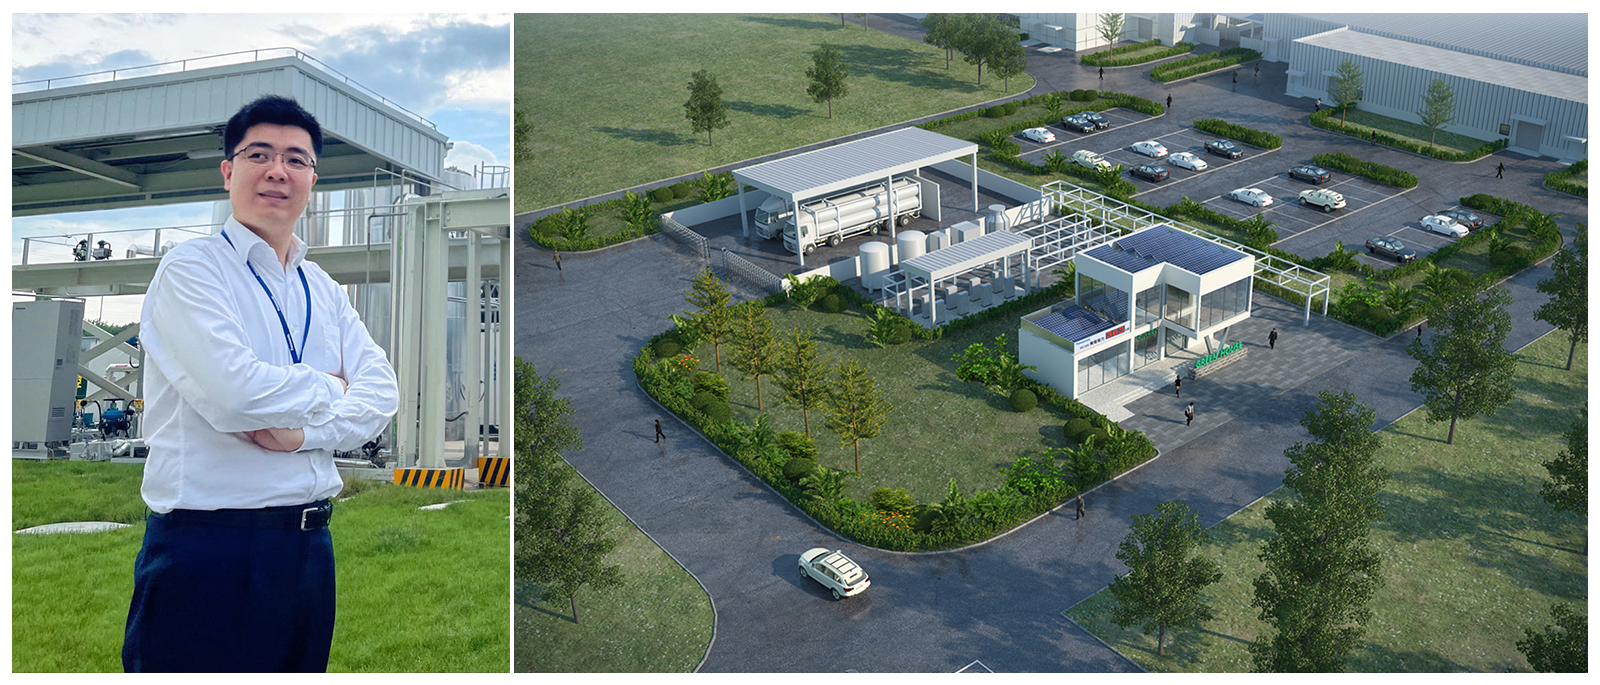 Left: Photo: Mengxiao Hou, Business Development Center, Panasonic China & Northeast Asia Company. Right: 3D rendering picture of the demonstration projects